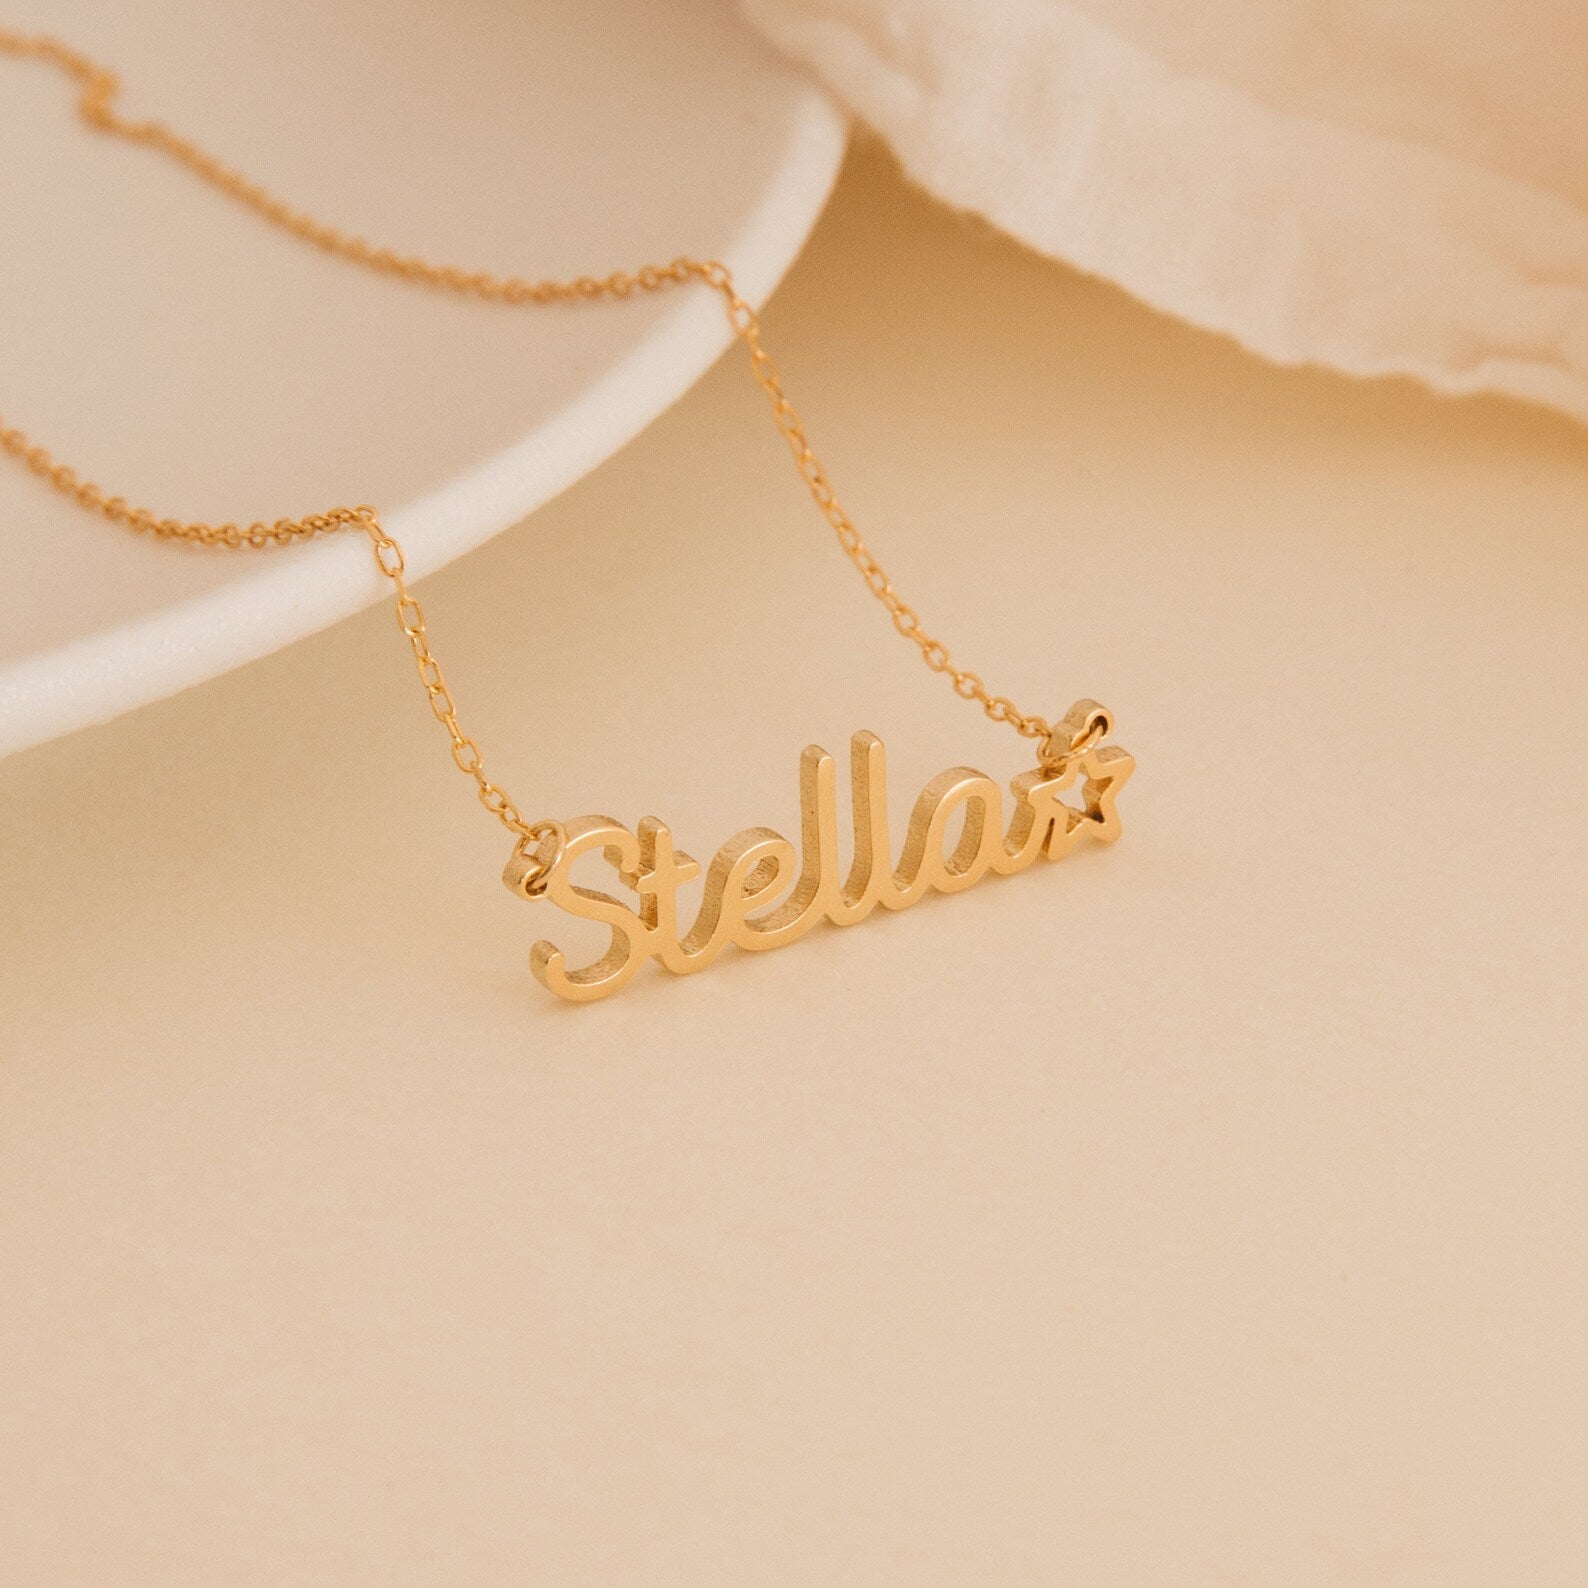 Maine Kid's Name Necklace